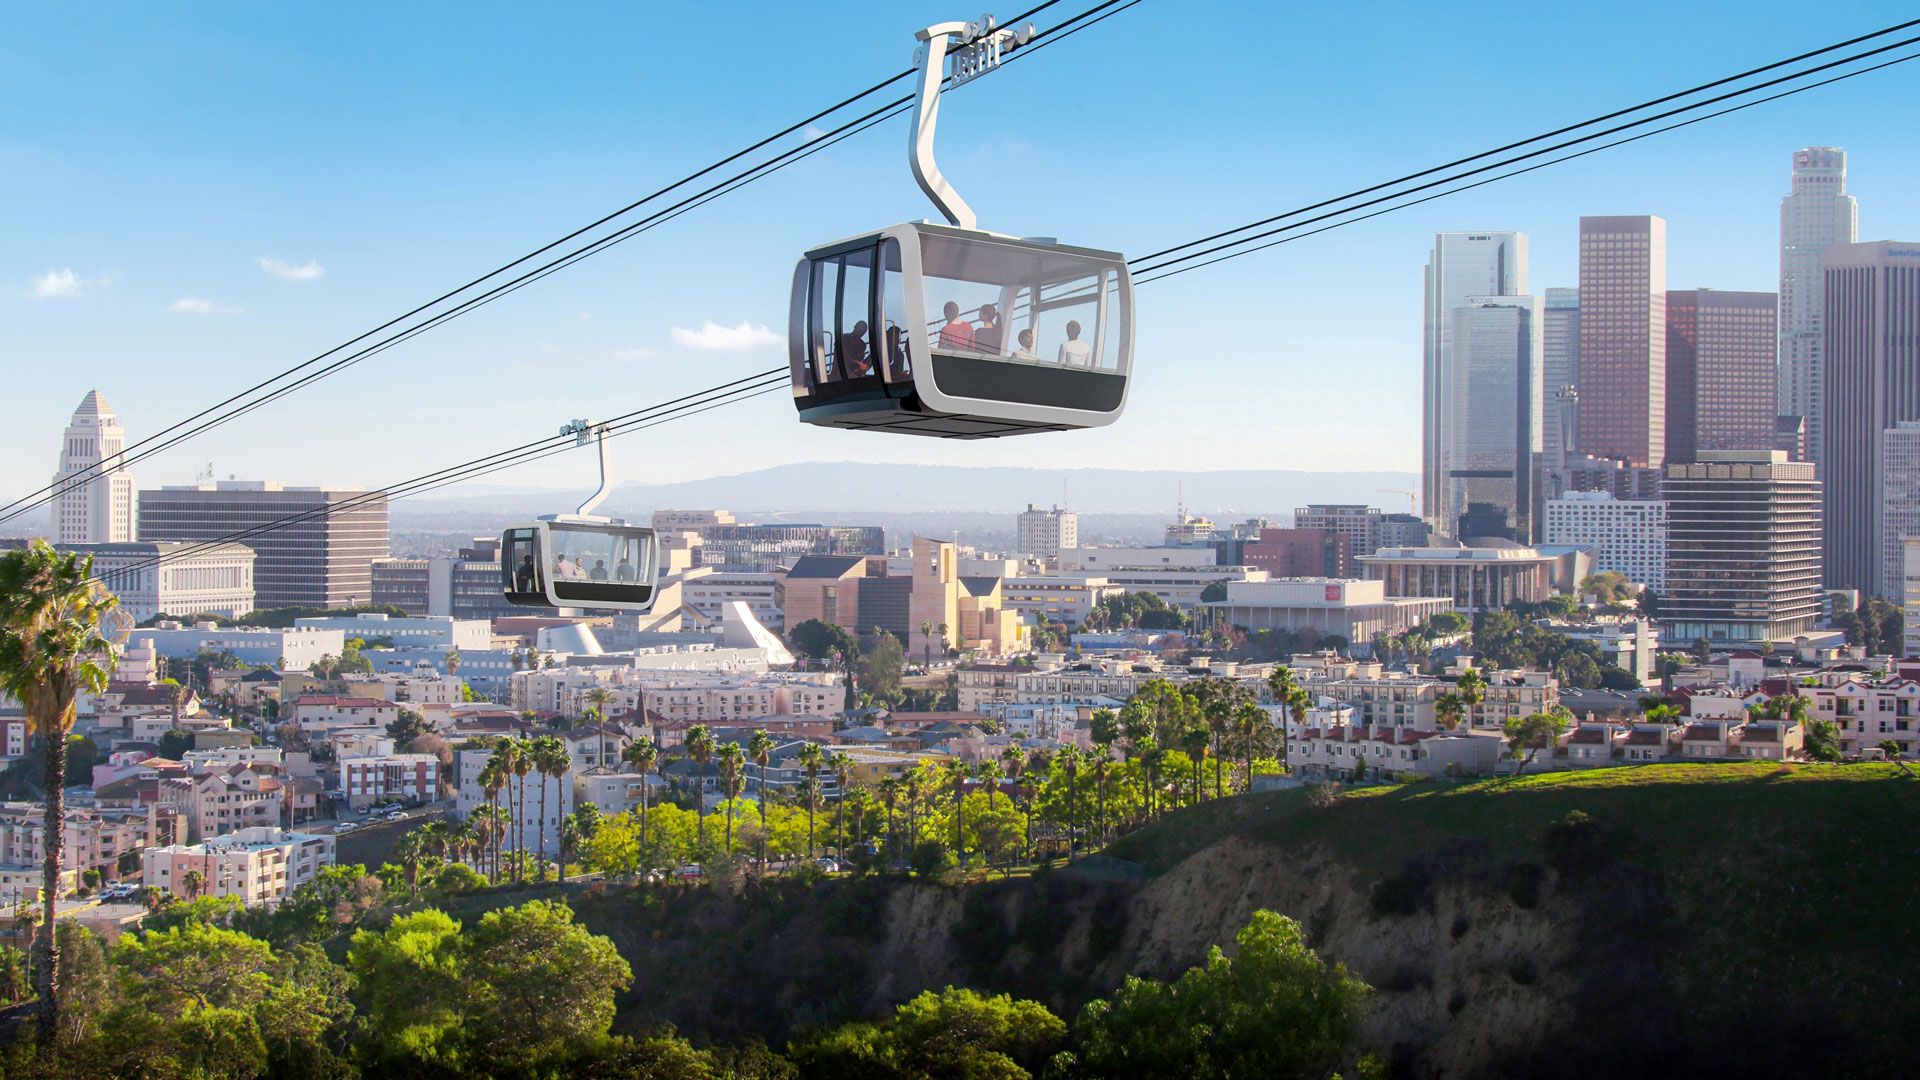 Rendering of Aerial Rapid Transit Technology from the Los Angeles department of transportation